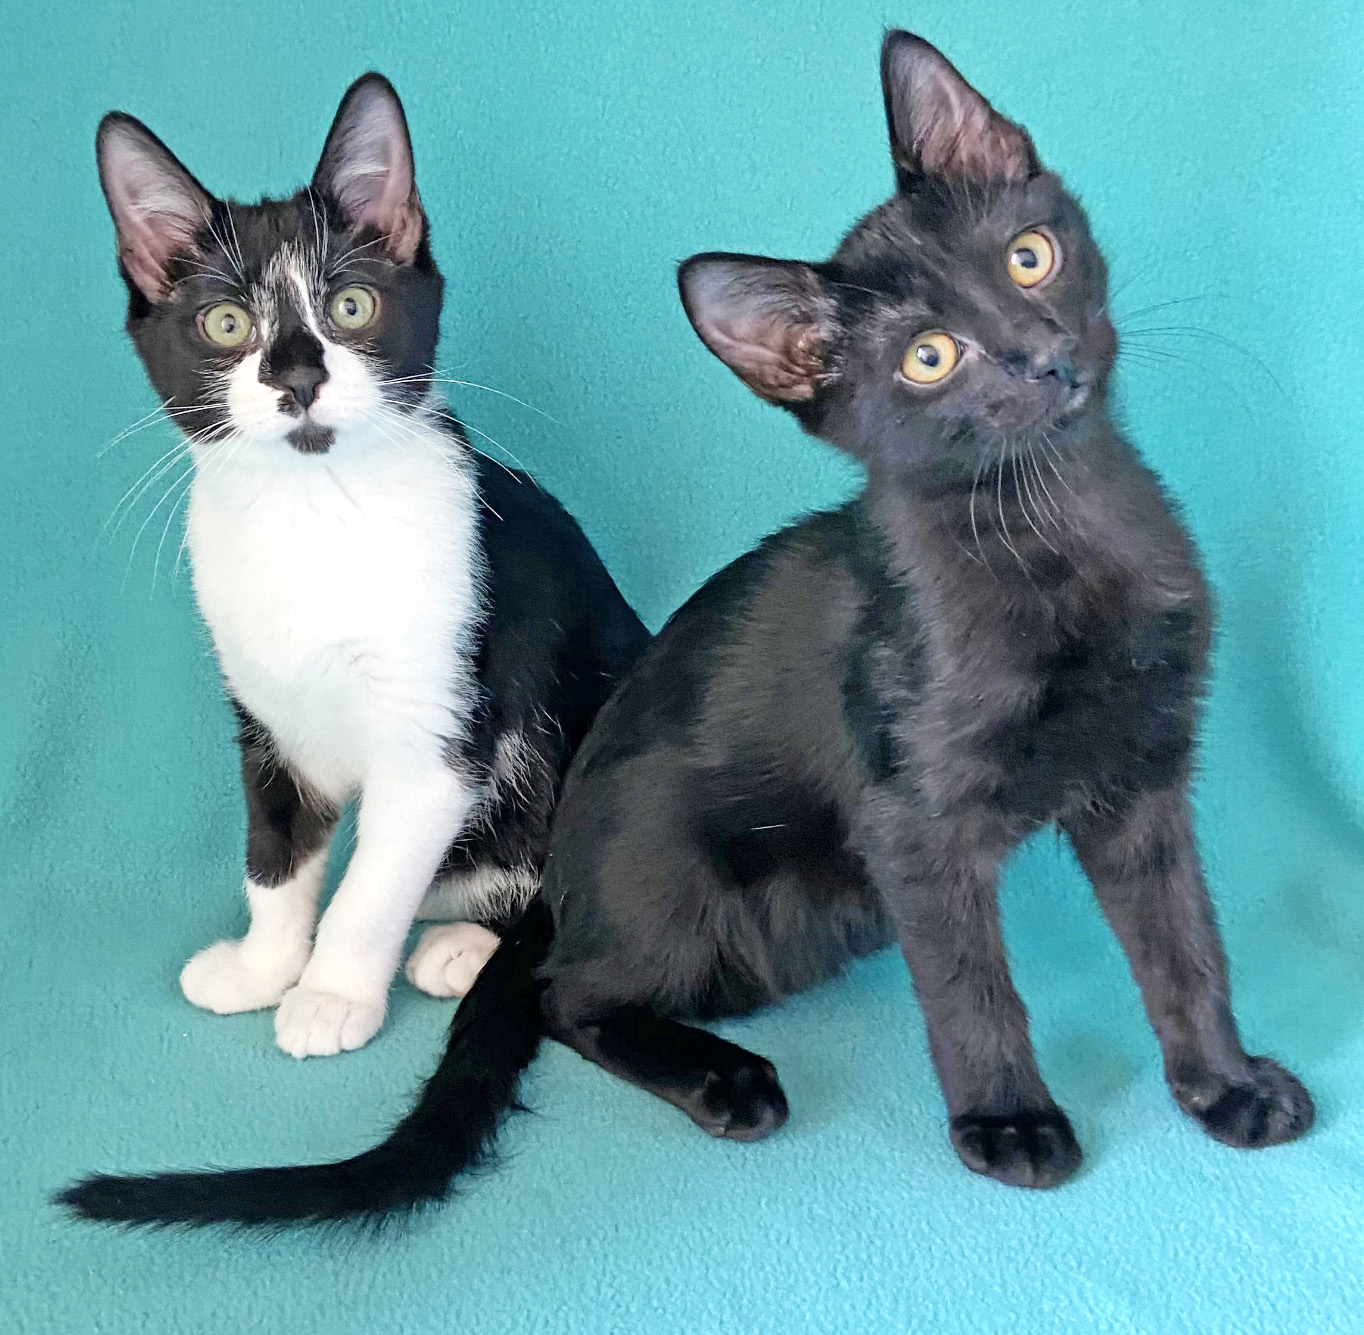 Happy Cats Haven – Pet of the Week: Hello, we’re Oscar and Roy, two inseparable kittens who are ready for our next big adventure! We’re both ready for any occasion; Oscar wears his tuxedo daily and I’m classic in black like a mini-panther. We had a rough start in life but now we love laps, purrs and pets. We’re 3-month-old kittens who go crazy for playtime! Our foster family had a loving and busy home so we should do well with other feline-friendly cats, dogs and kids as long as we have a gentle introduction to each, one at a time. Our adoption together is just $210 and includes our neuters, vaccinations, microchips, food and litter starter kits, and a free well-kitty checkup each. Happy Cats Haven: 719-362-4600, 327 Manitou Ave. Adoptions by appointment only until further notice.www.HappyCatsHaven.org, www.Facebook.com/HappyCatsHaven.